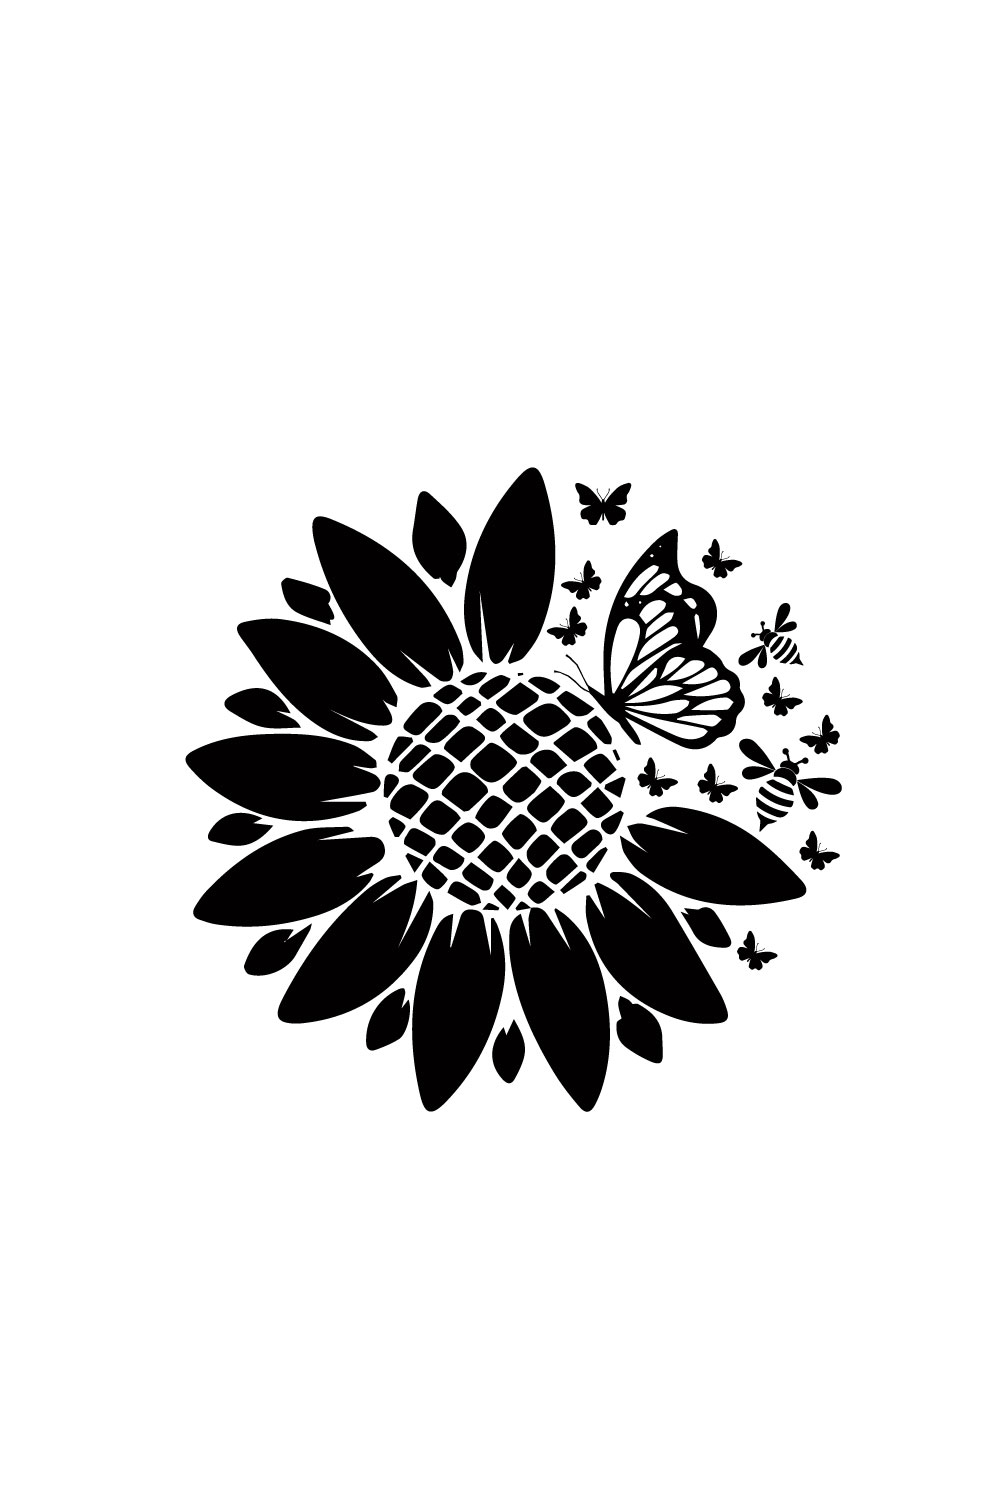 Free floral bee with sunflower logo pinterest preview image.